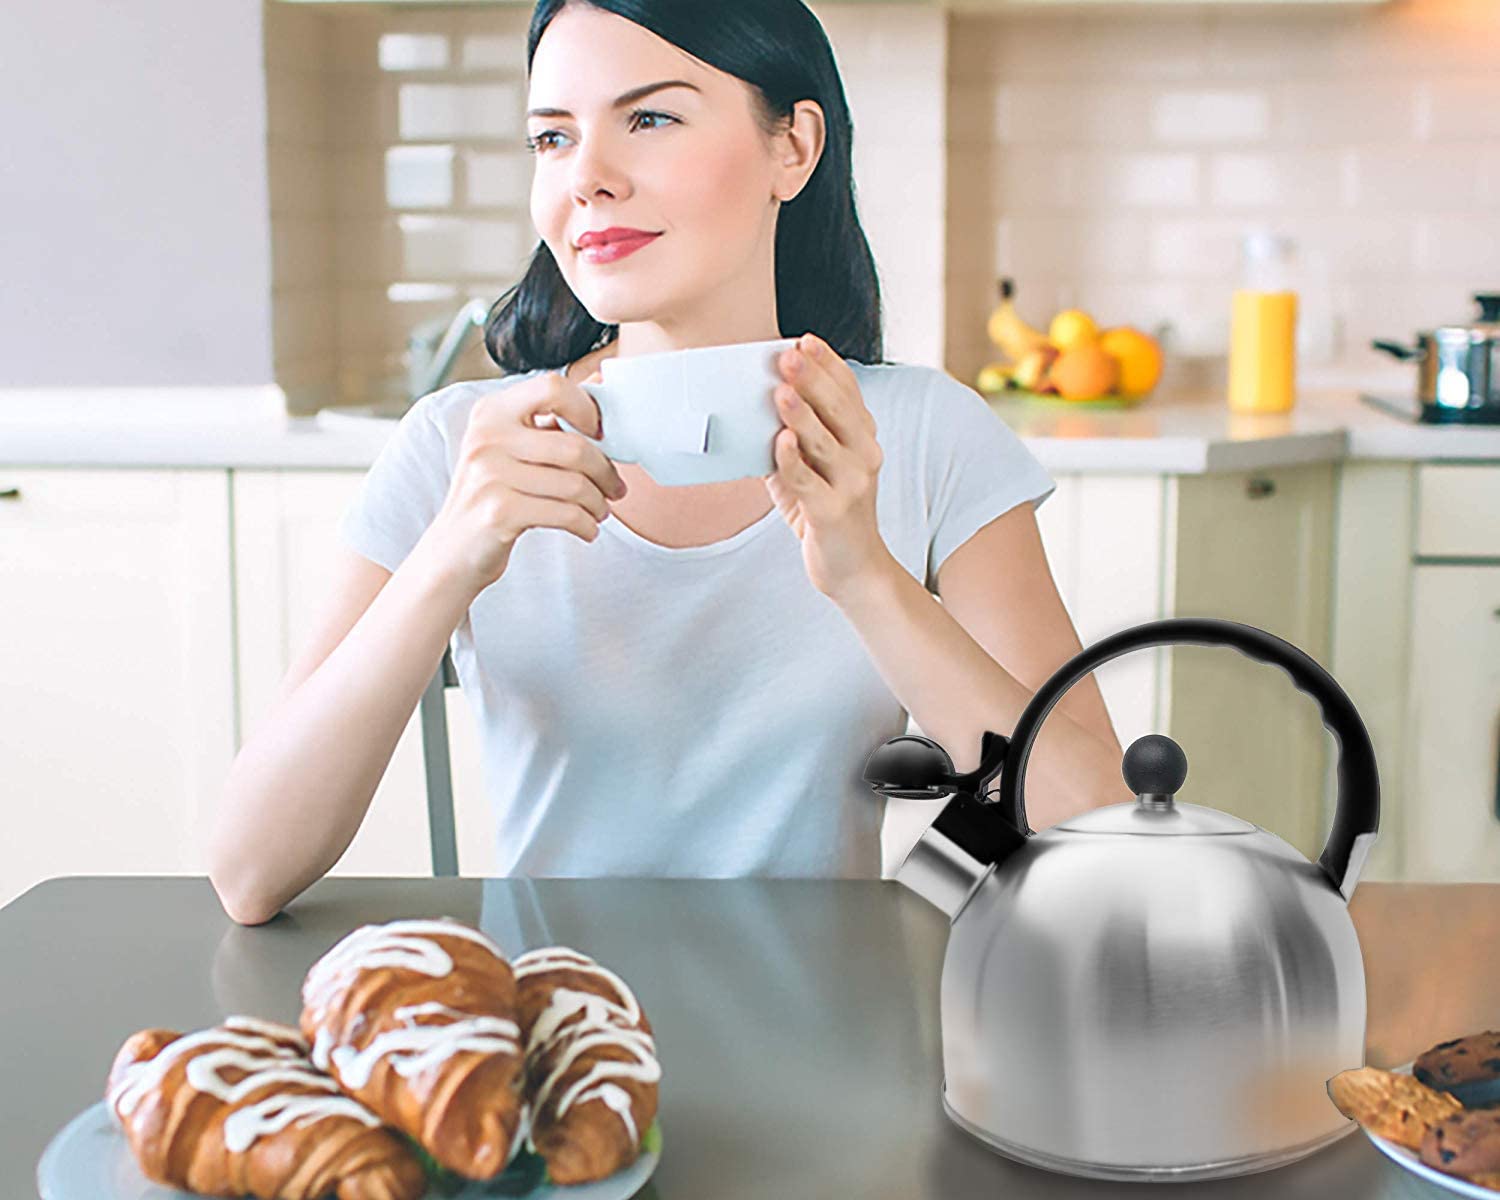 2.64 Quart Surgical Stainless Steel Stove Top Whistle Tea Kettle